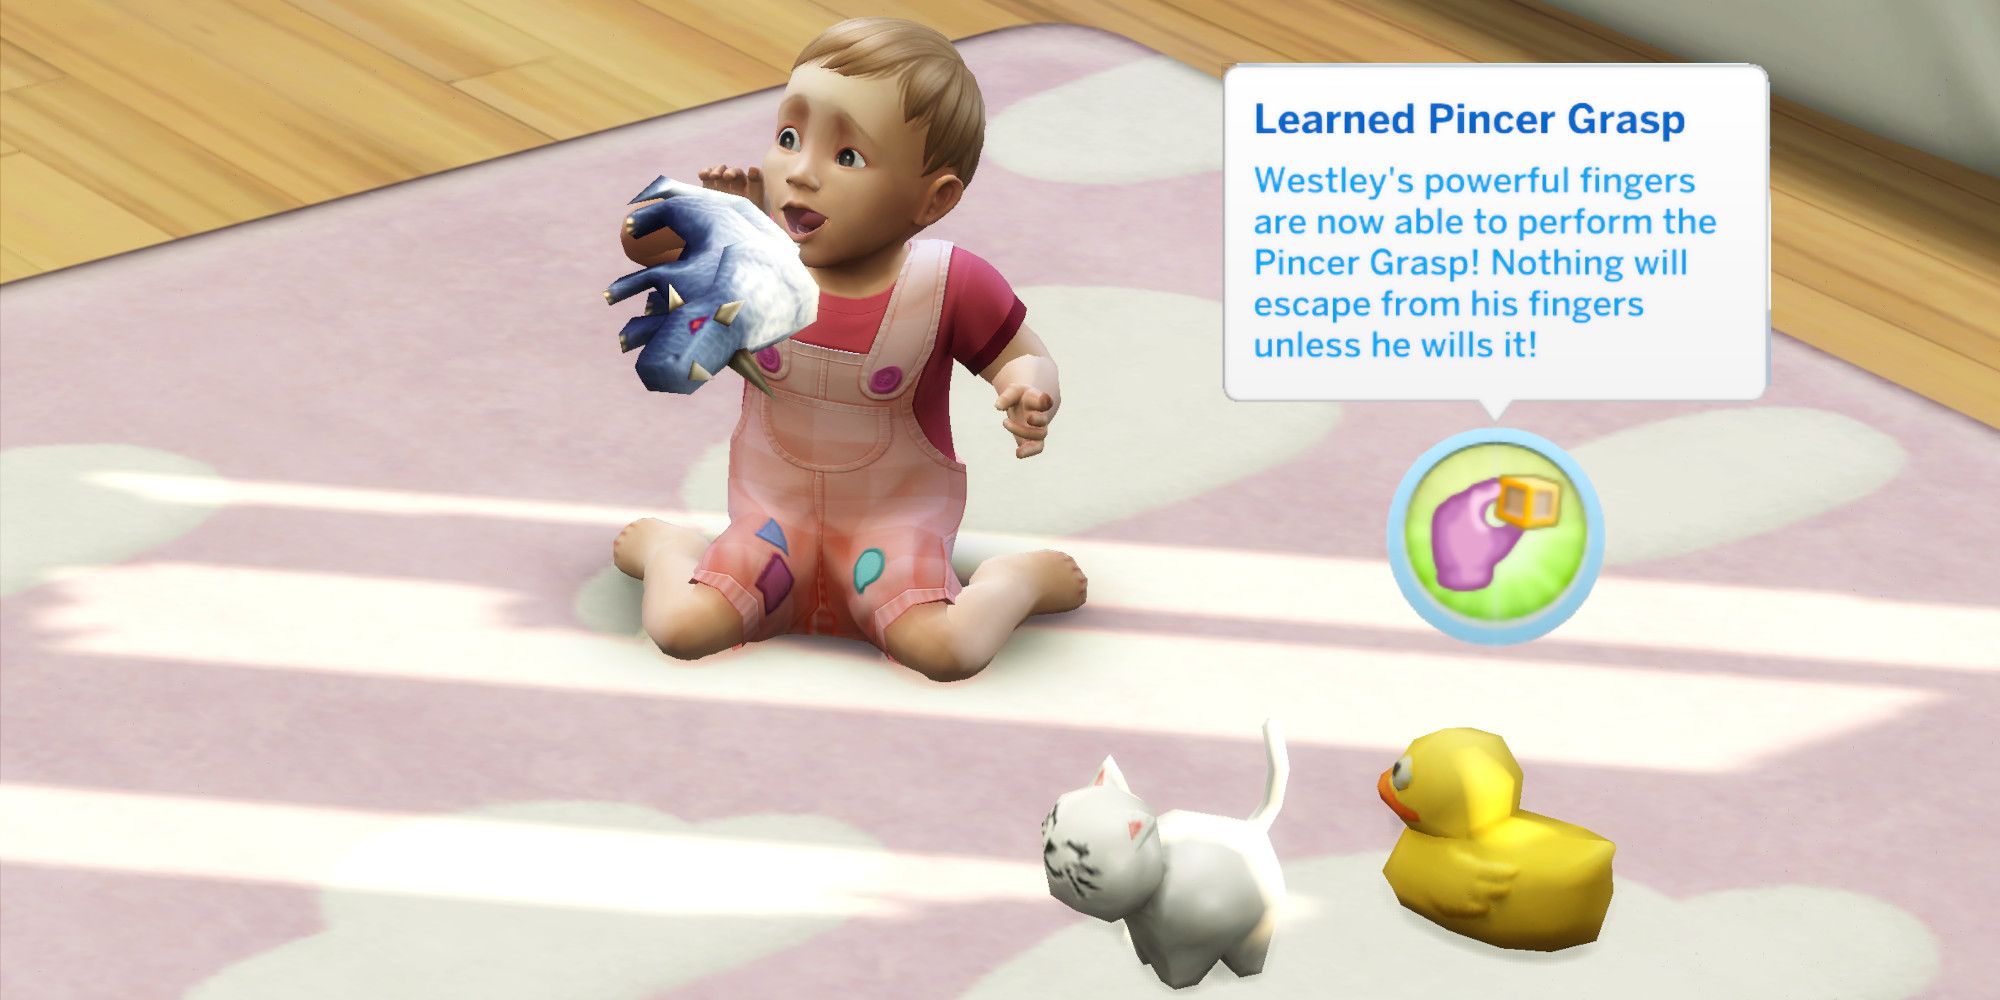 A baby Sim from The Sims 4 playing with toys.  The text from the Pincer Grasp Learned milestone is overlaid